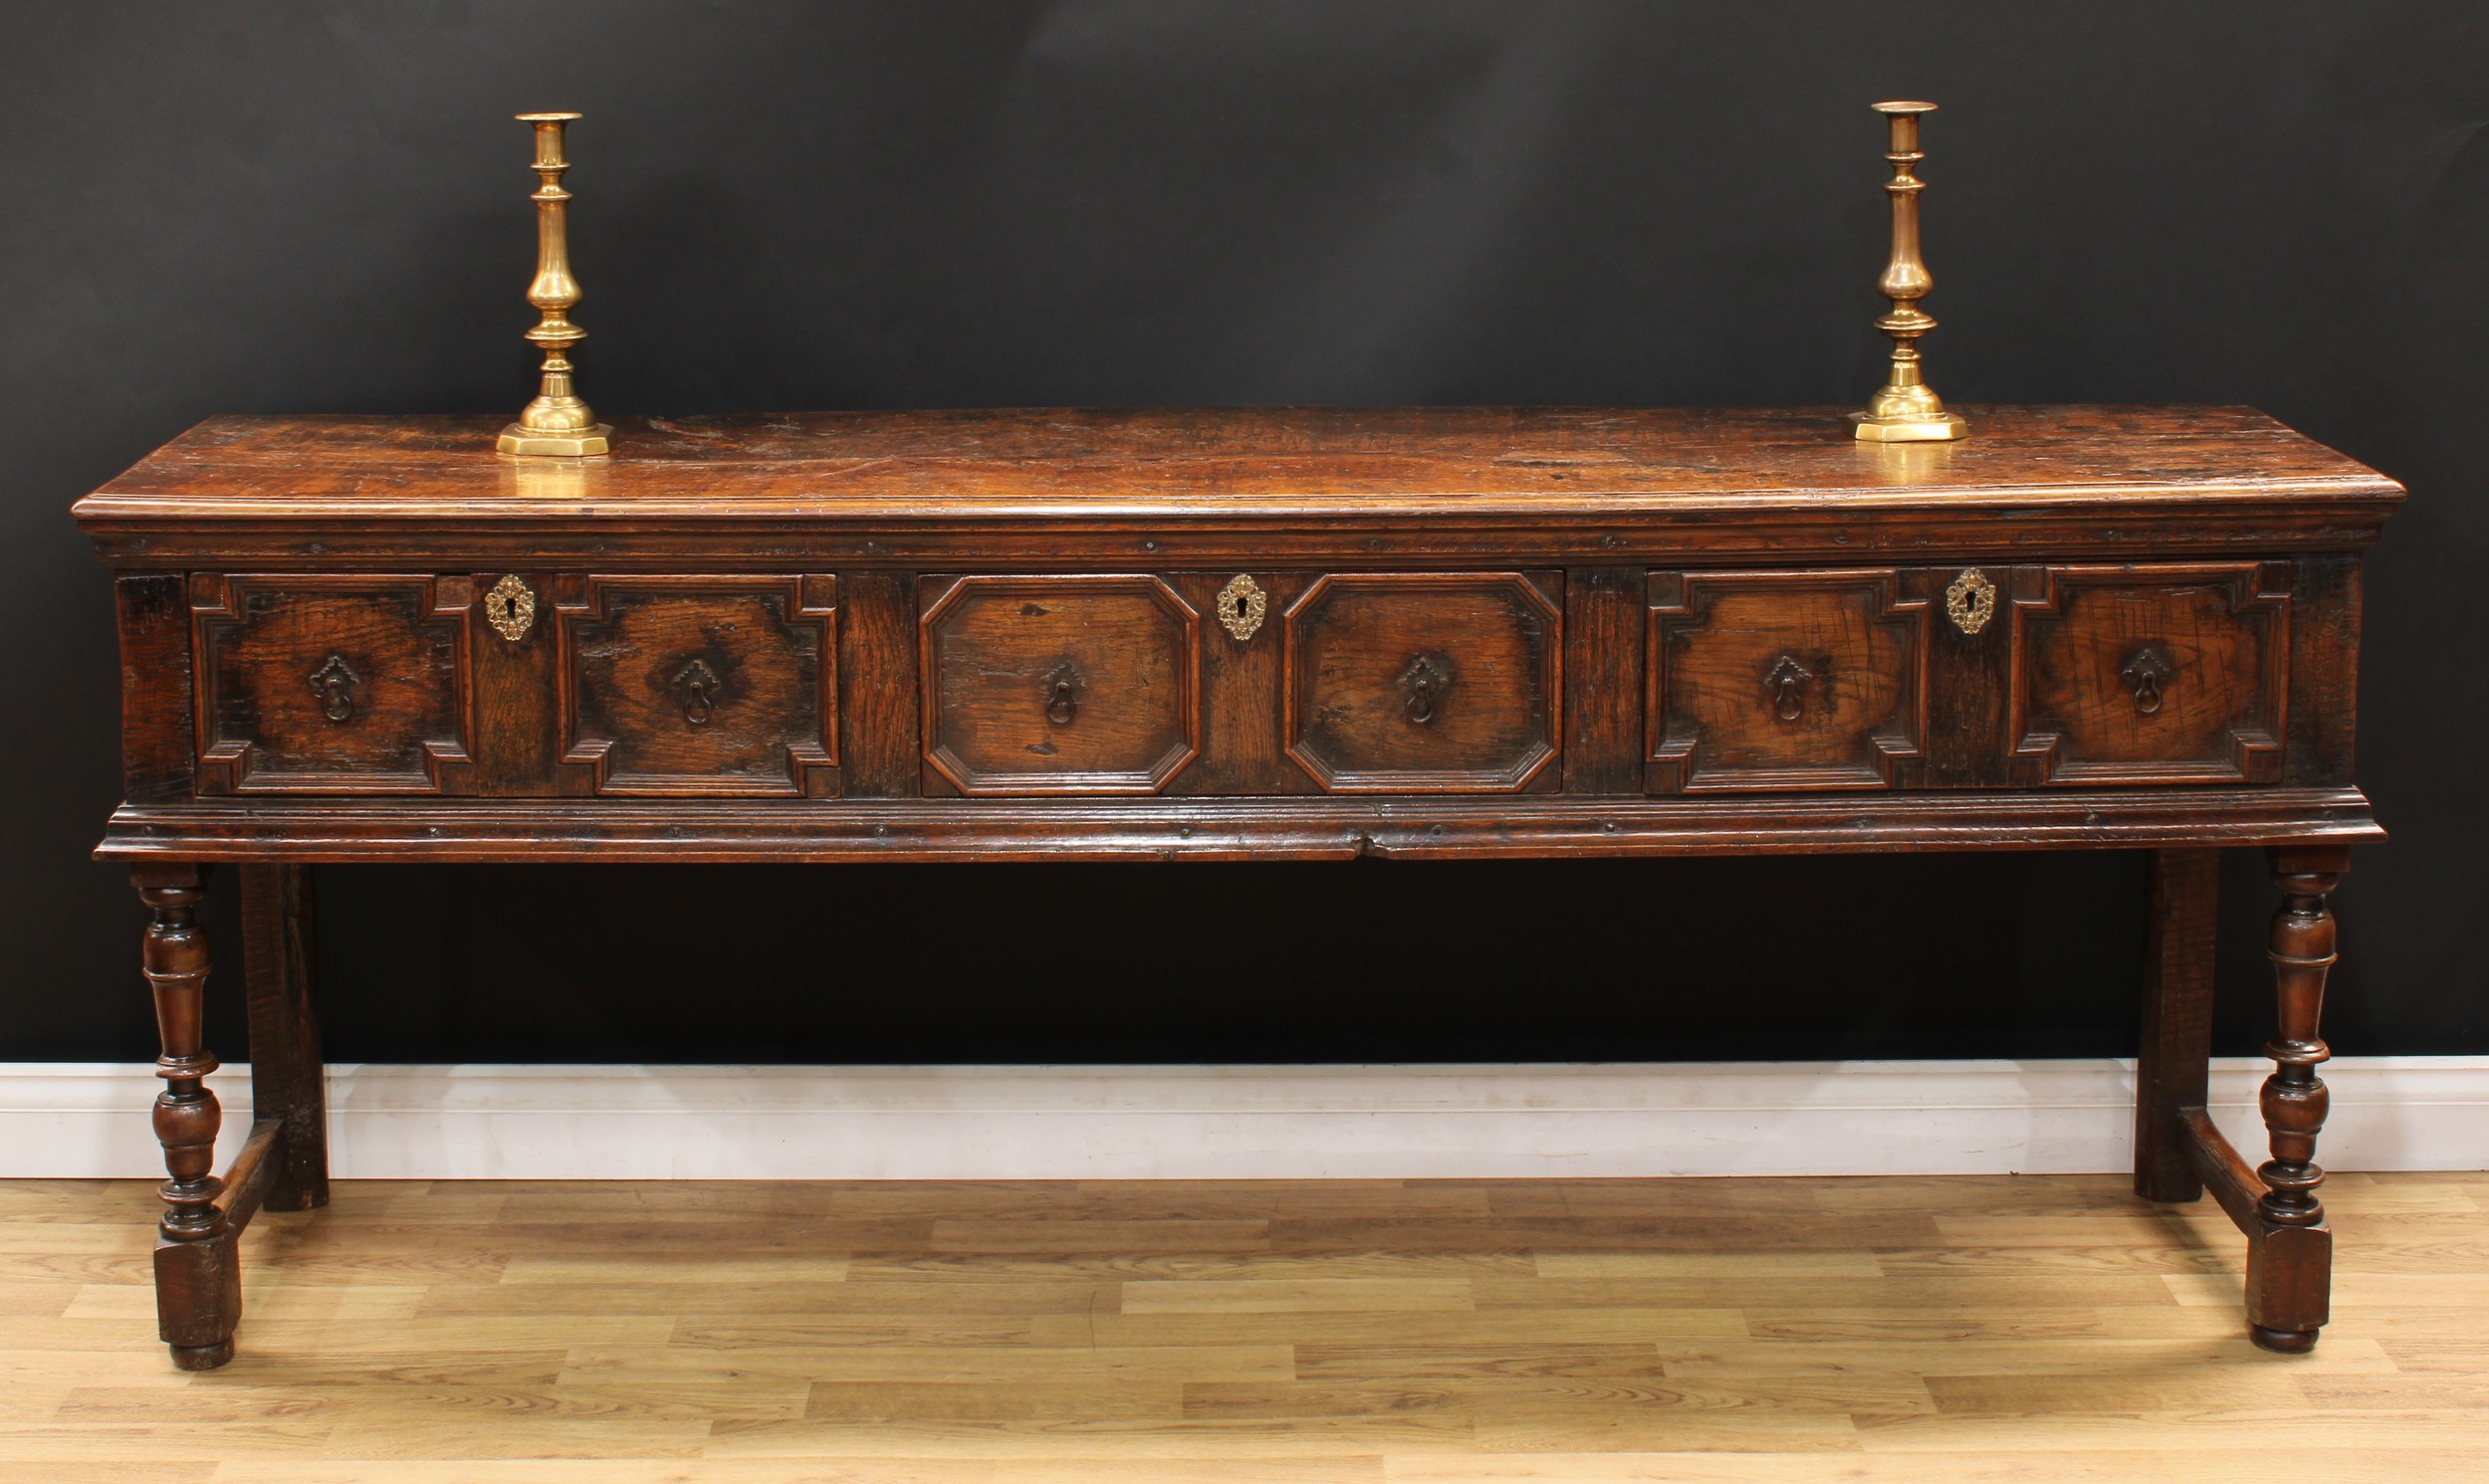 A Charles II design oak block front low dresser, oversailing plank top with moulded edge above three